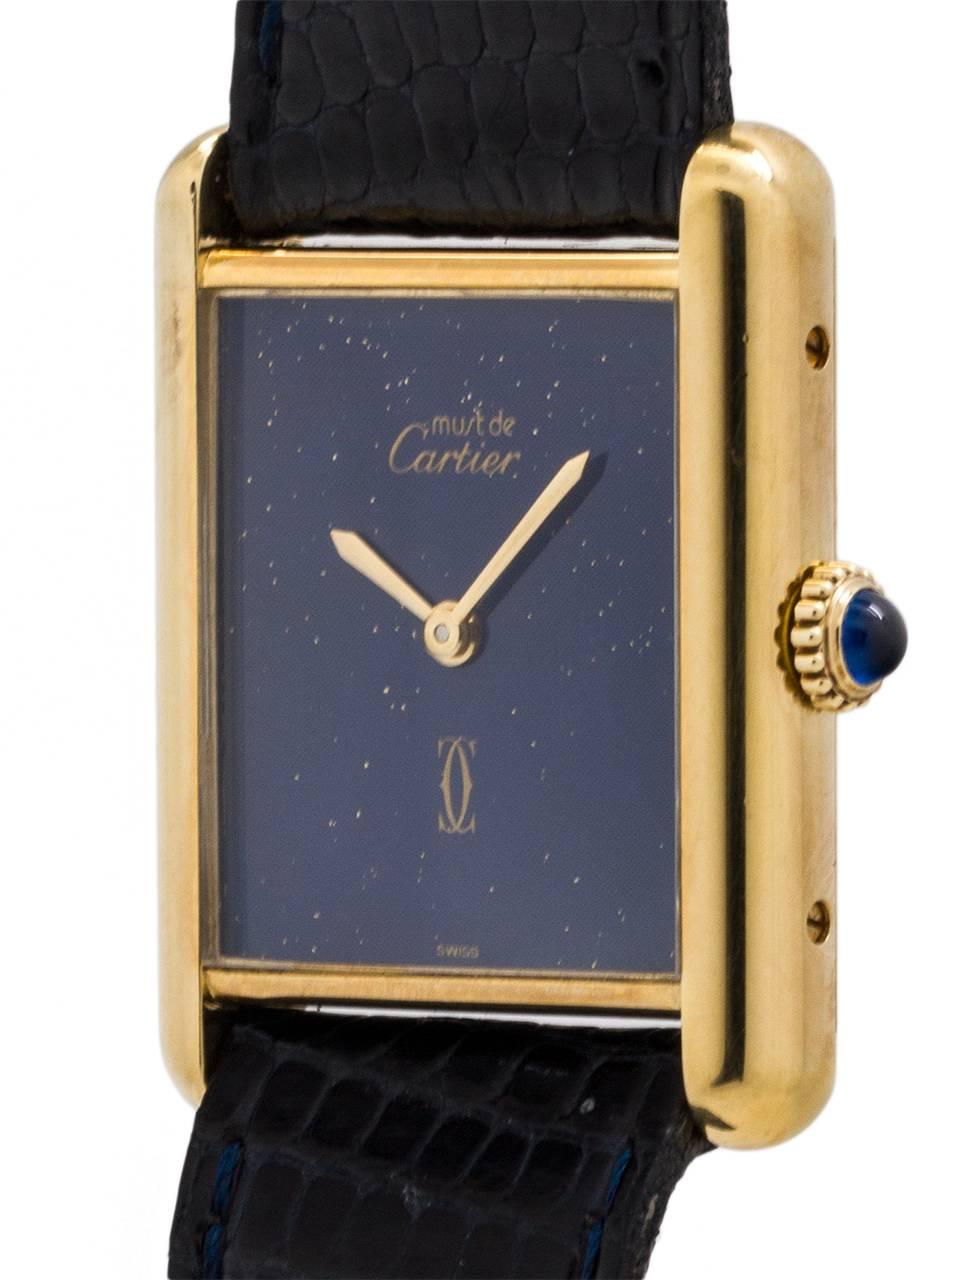 
Cartier Man's Tank Louis vermeil circa 1970s. 23.5 x 31mm case with mineral glass crystal and blue cabachon sapphire crown. With pleasing “faux” lapis blue dial signed Must de Cartier with double C logo and gold hands. Powered by 17 jewel manual